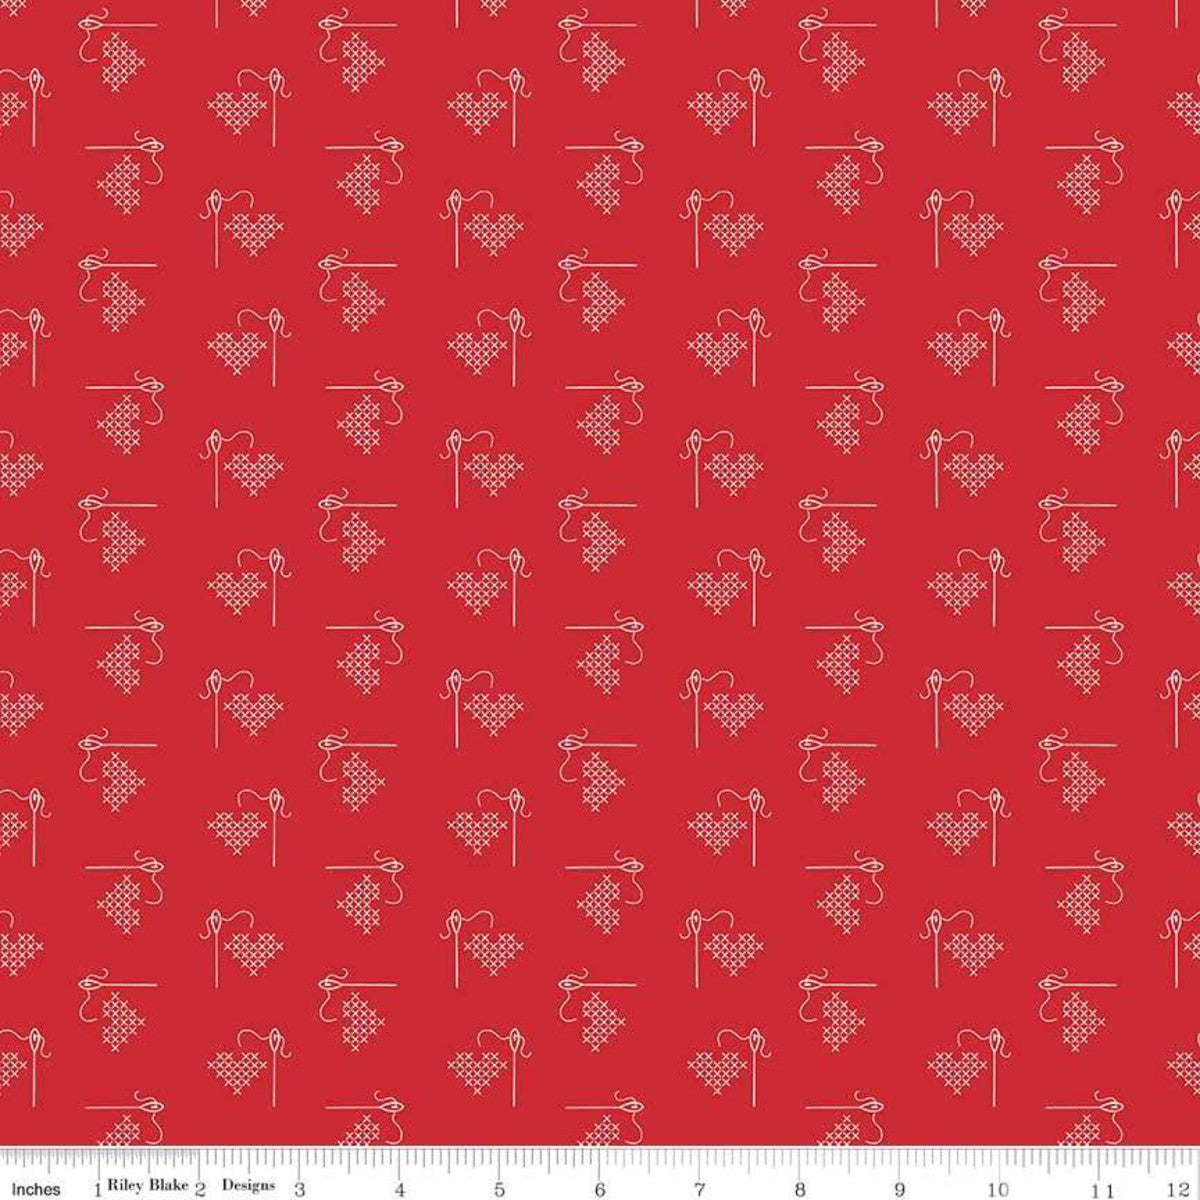 Bee Basics Red Heart Yardage by Lori Holt for Riley Blake Designs